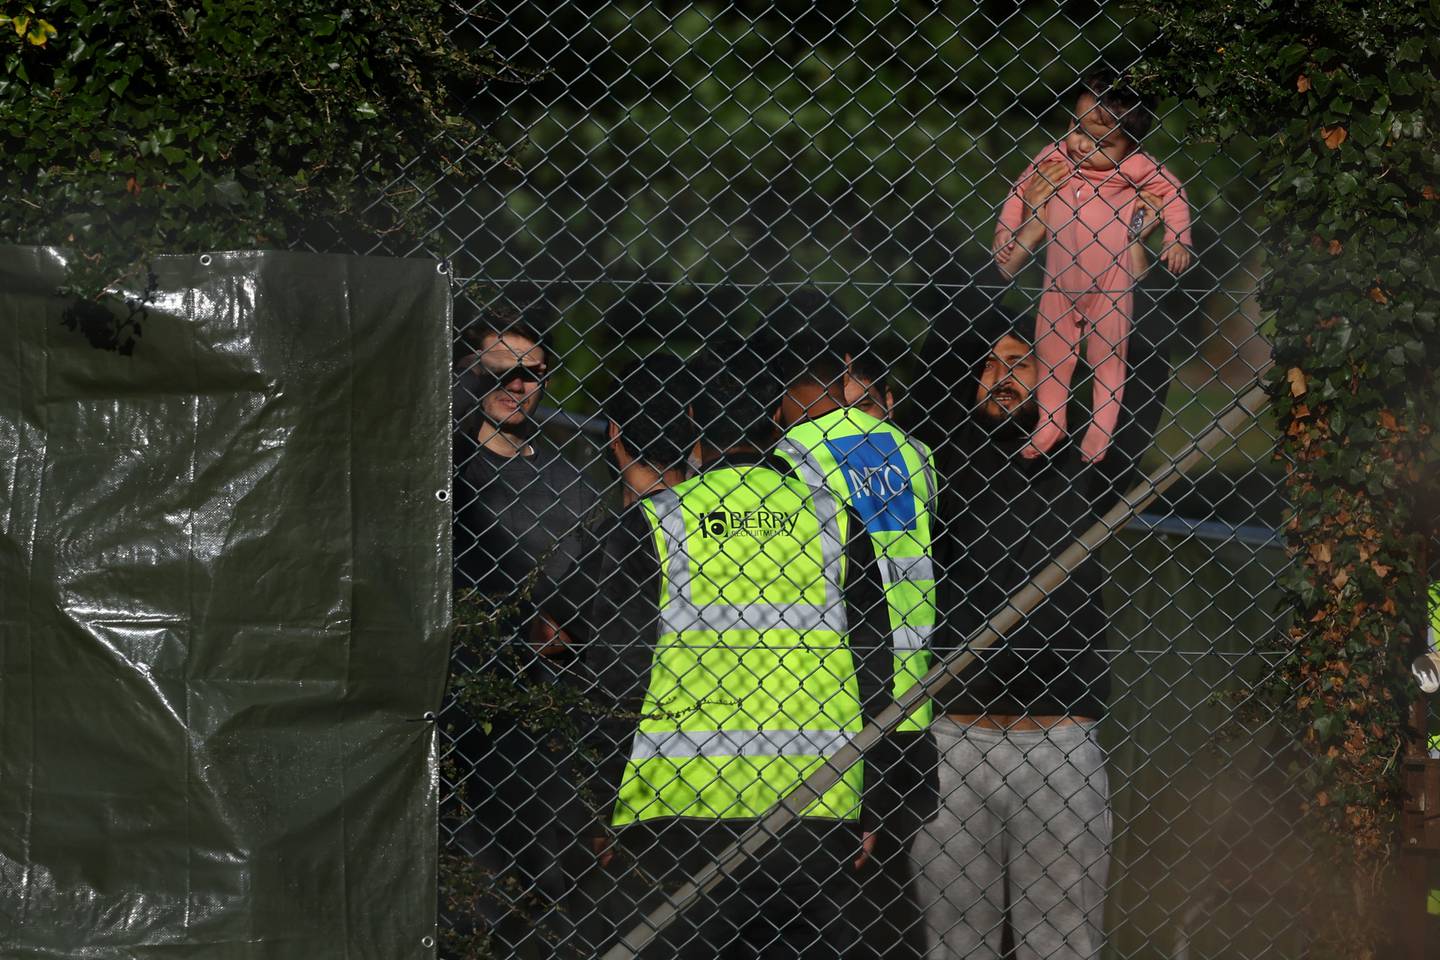 Scene of desperation as a detainee holds up a baby inside the centre in Manston. Reuters